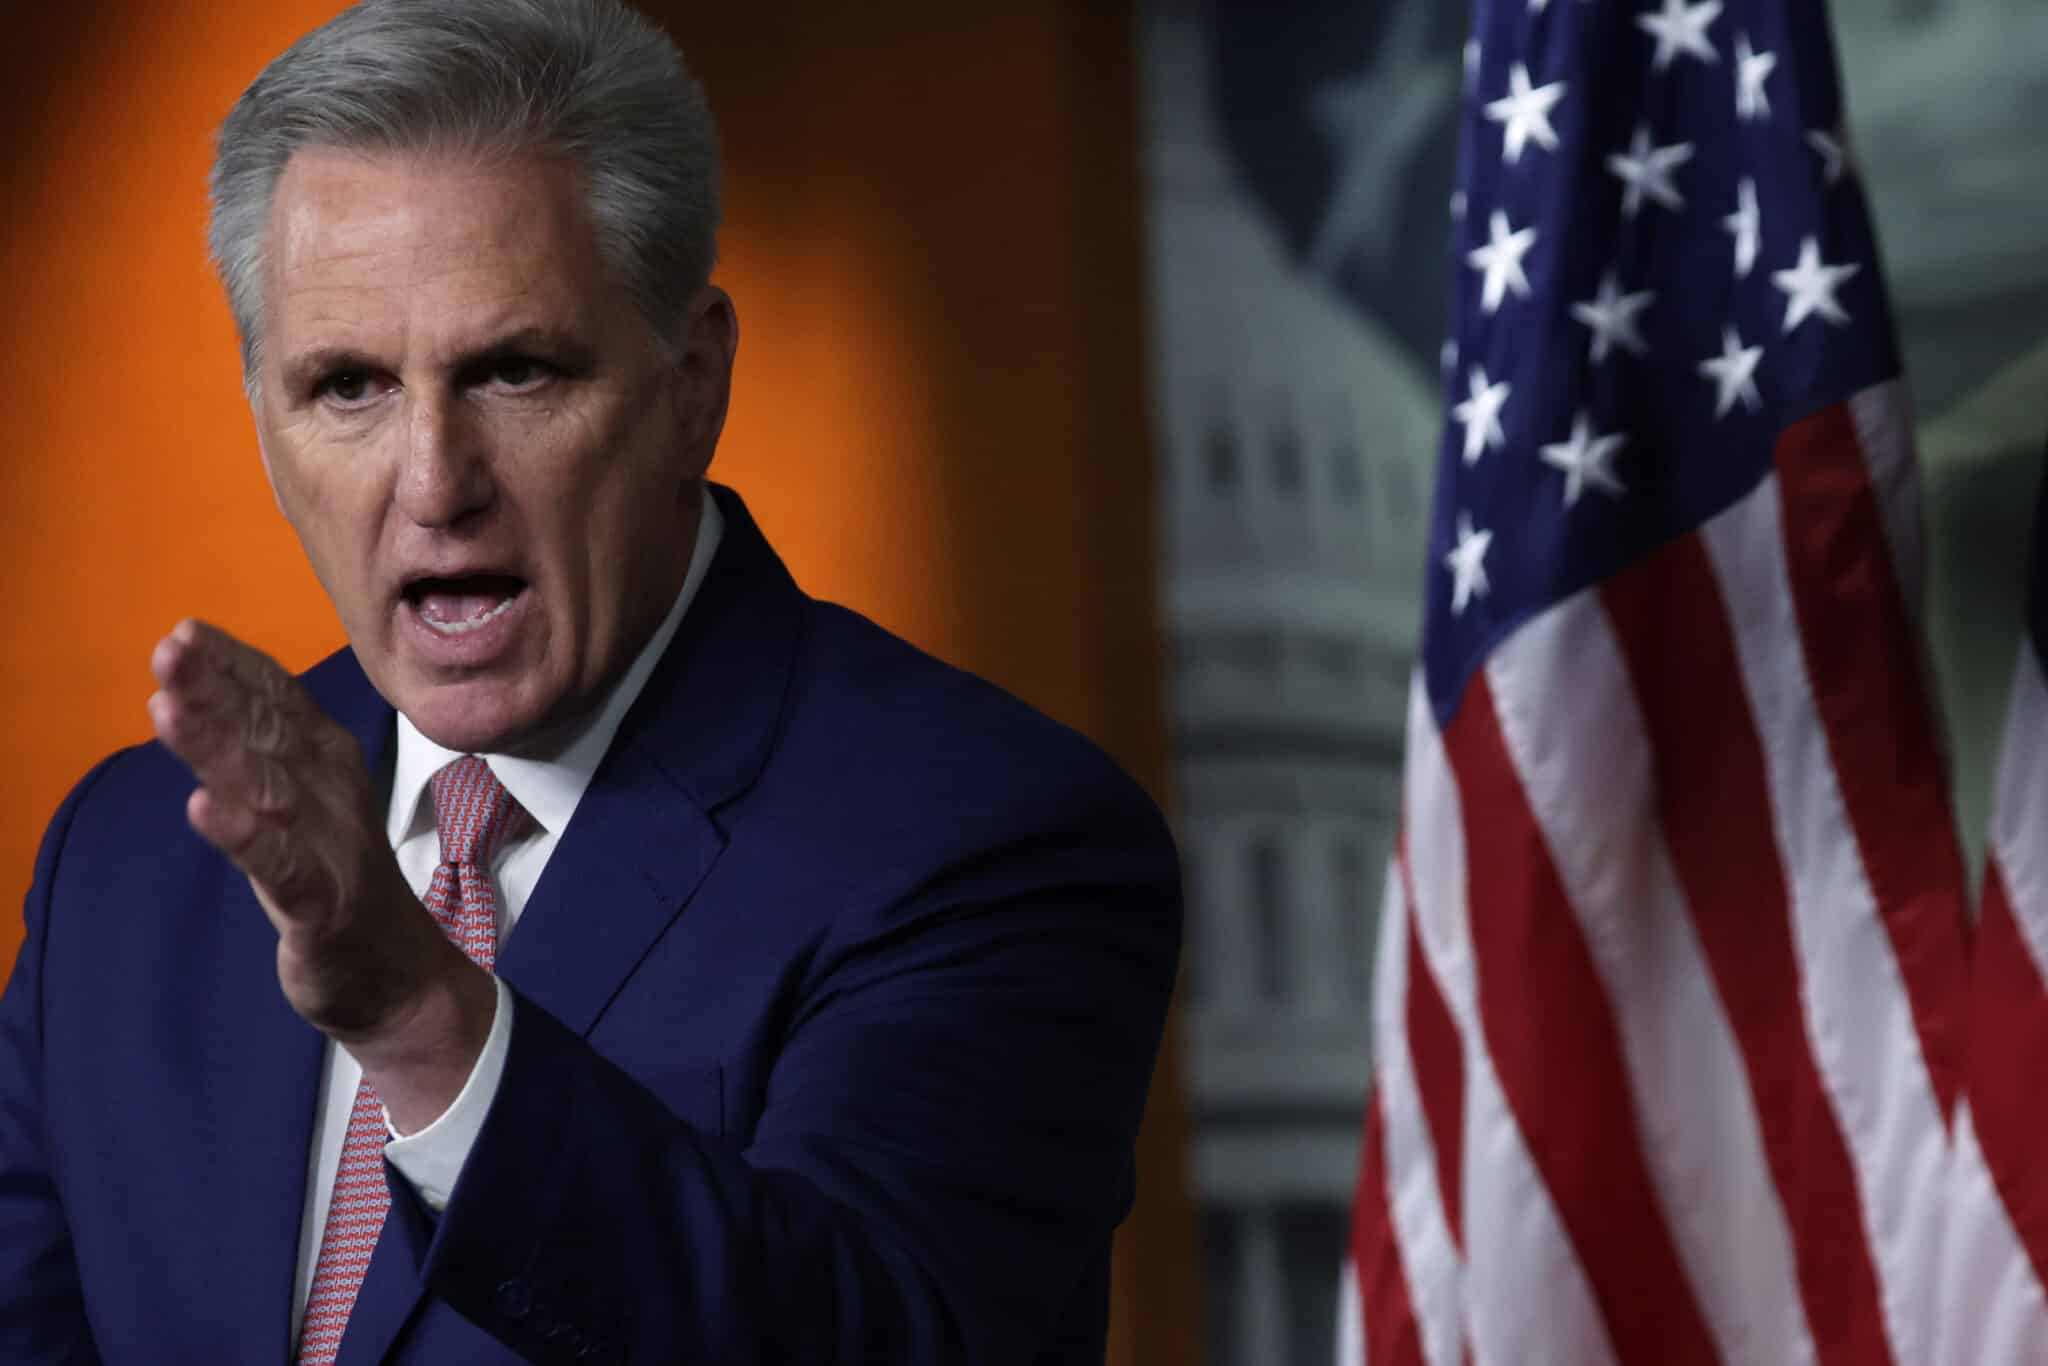 WASHINGTON, DC - JANUARY 13:  U.S. House Minority Leader Rep. Kevin McCarthy (R-CA) speaks during a weekly news conference at the U.S. Capitol on January 13, 2022 in Washington, DC. Leader McCarthy announced yesterday that he would not voluntarily cooperate with the Select Committee to Investigate the January 6th Attack on the United States Capitol after the committee has formally requested an interview with him. (Photo by Alex Wong/Getty Images)